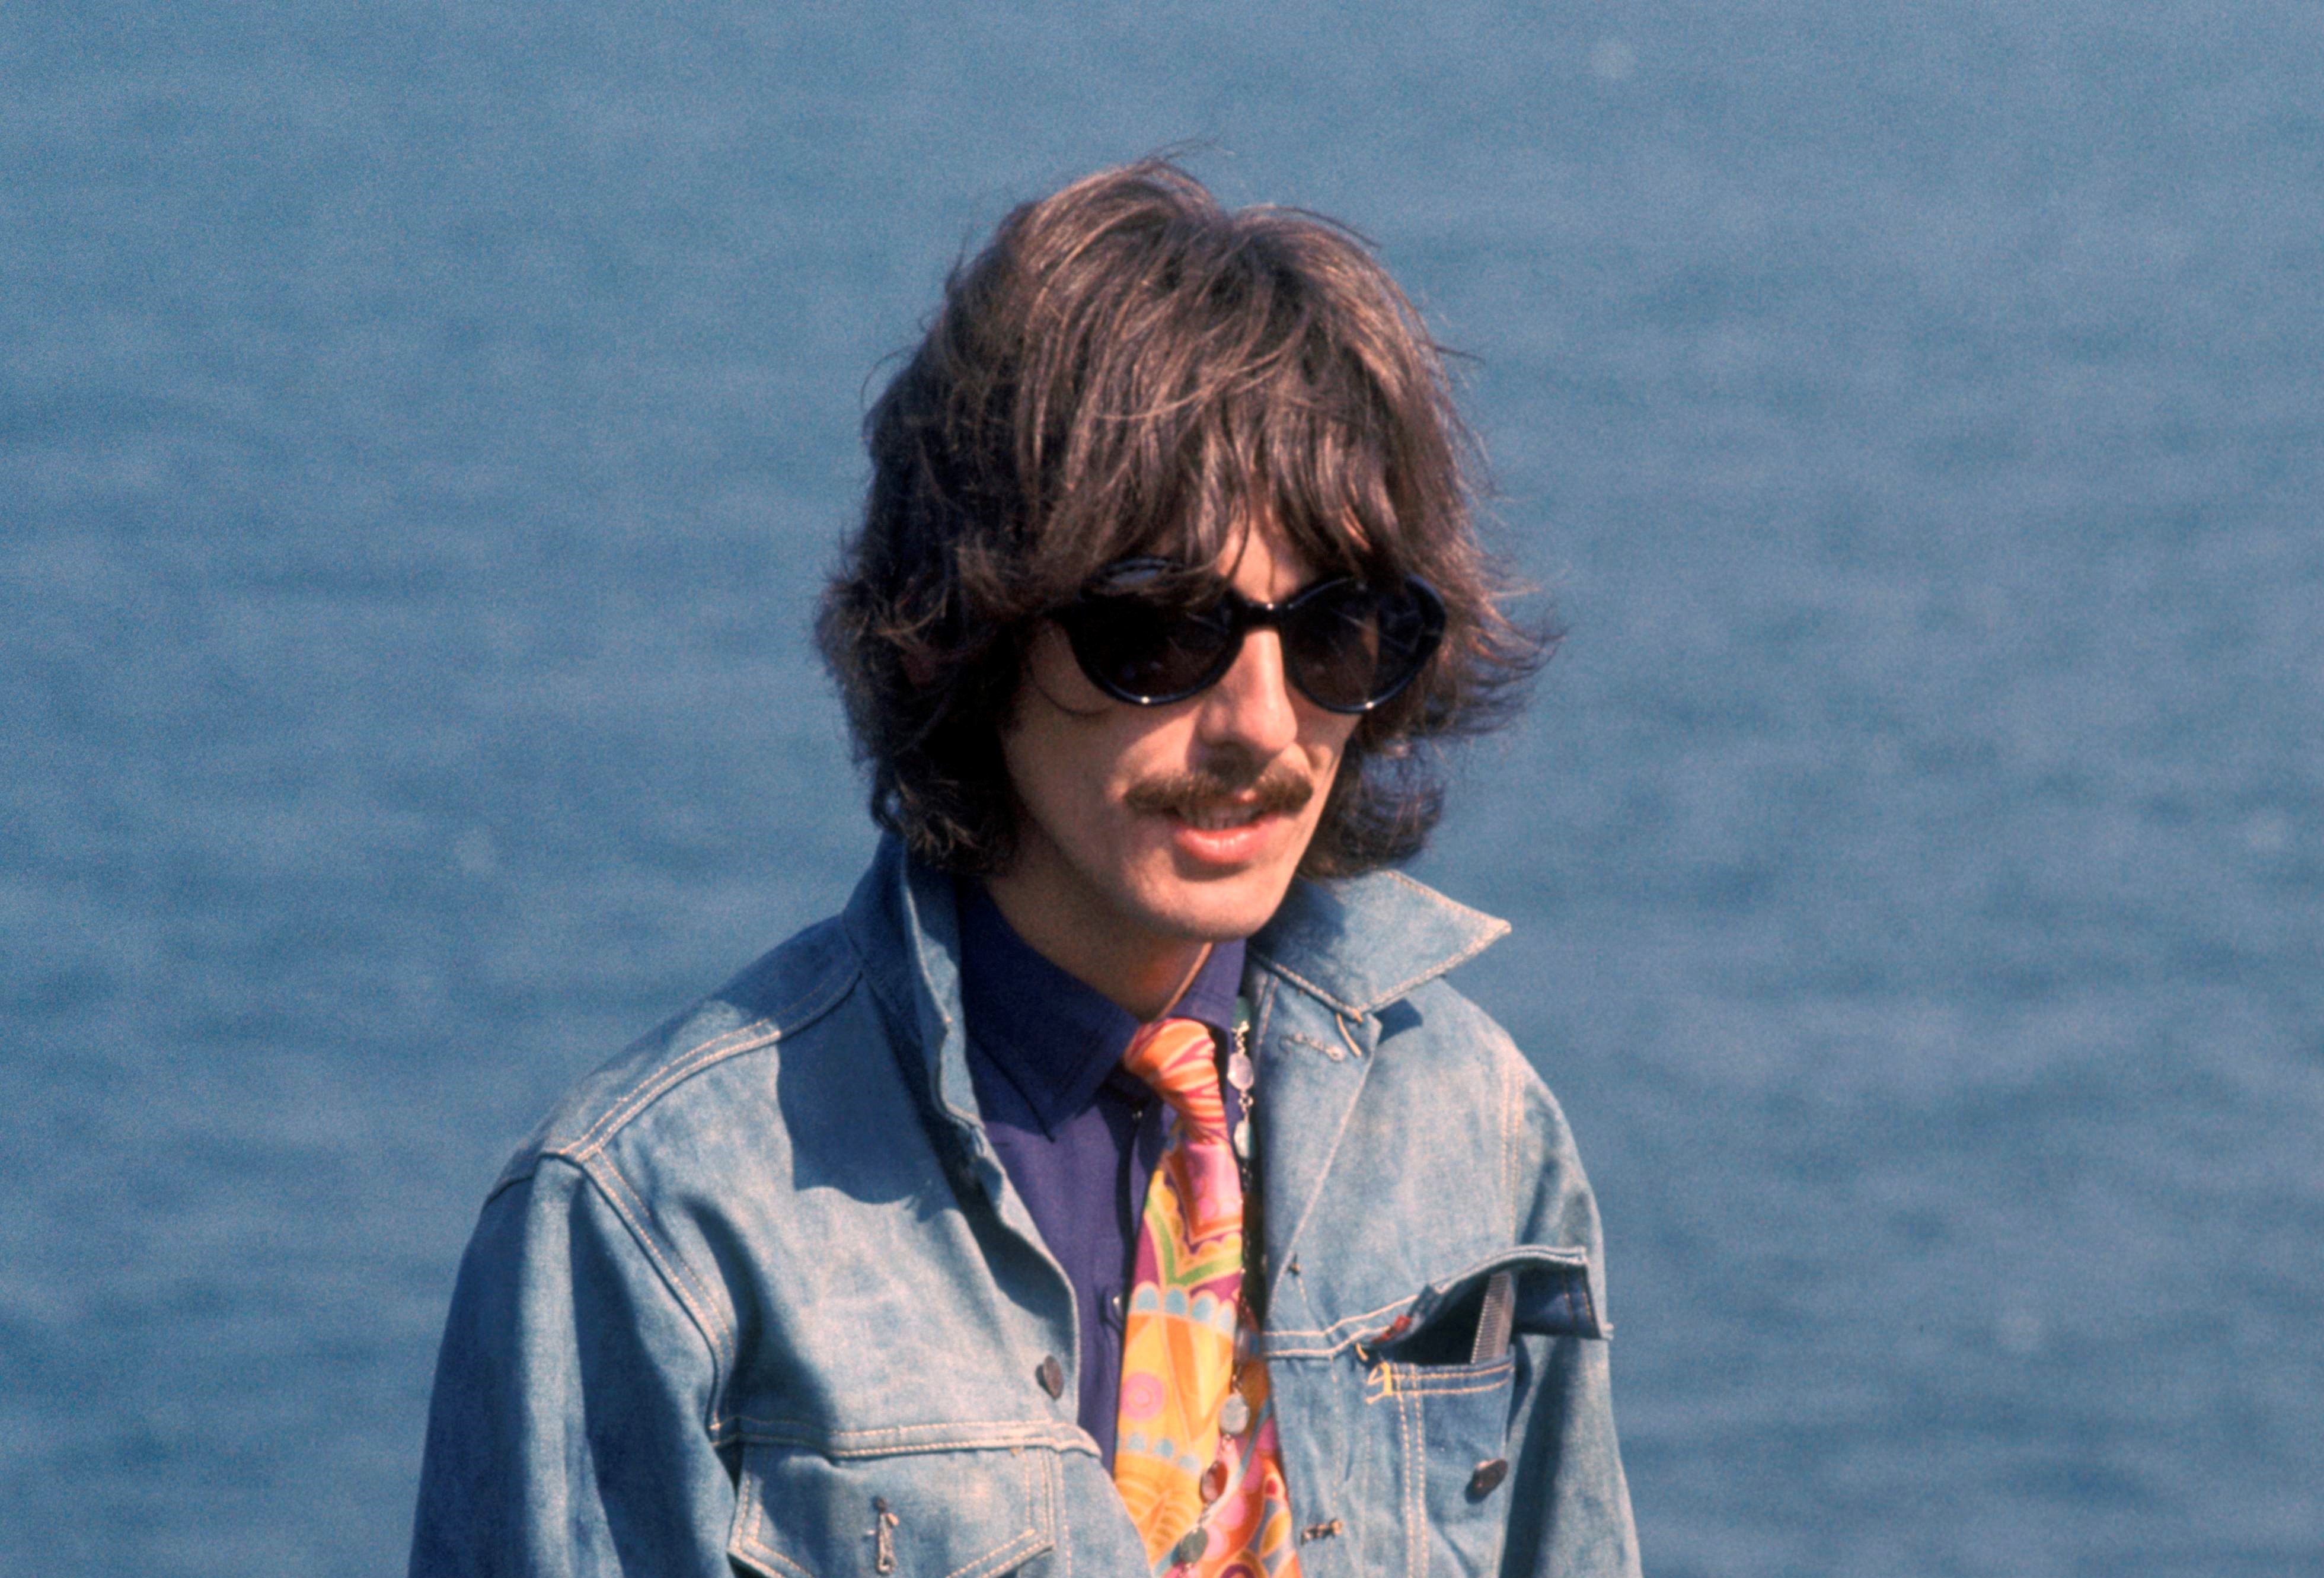 George Harrison wears a denim jacket and stands in front of water. 